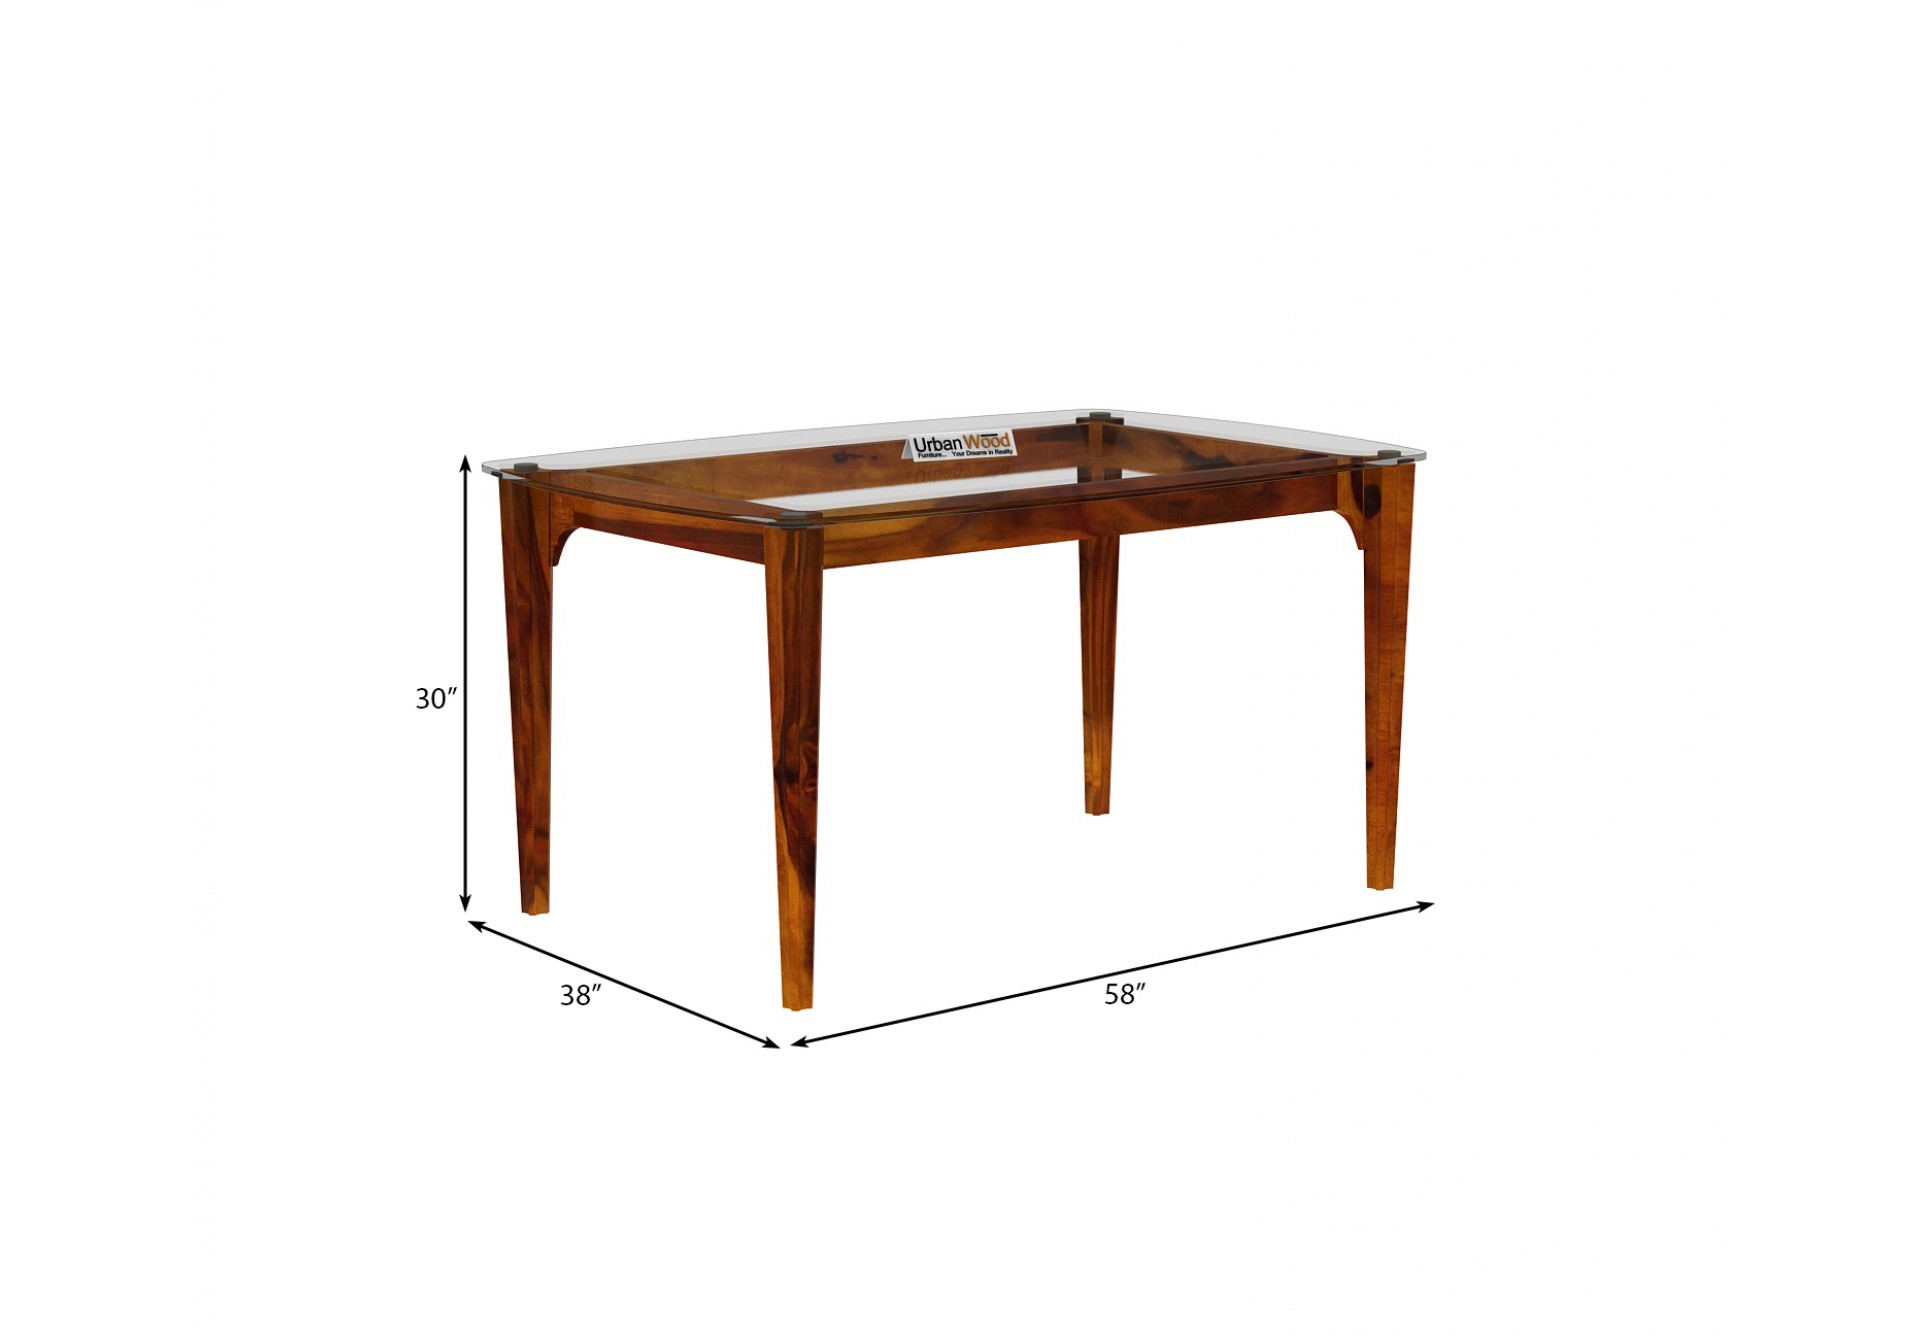 Quipo 4-Seater Dining Table (Honey Finish)